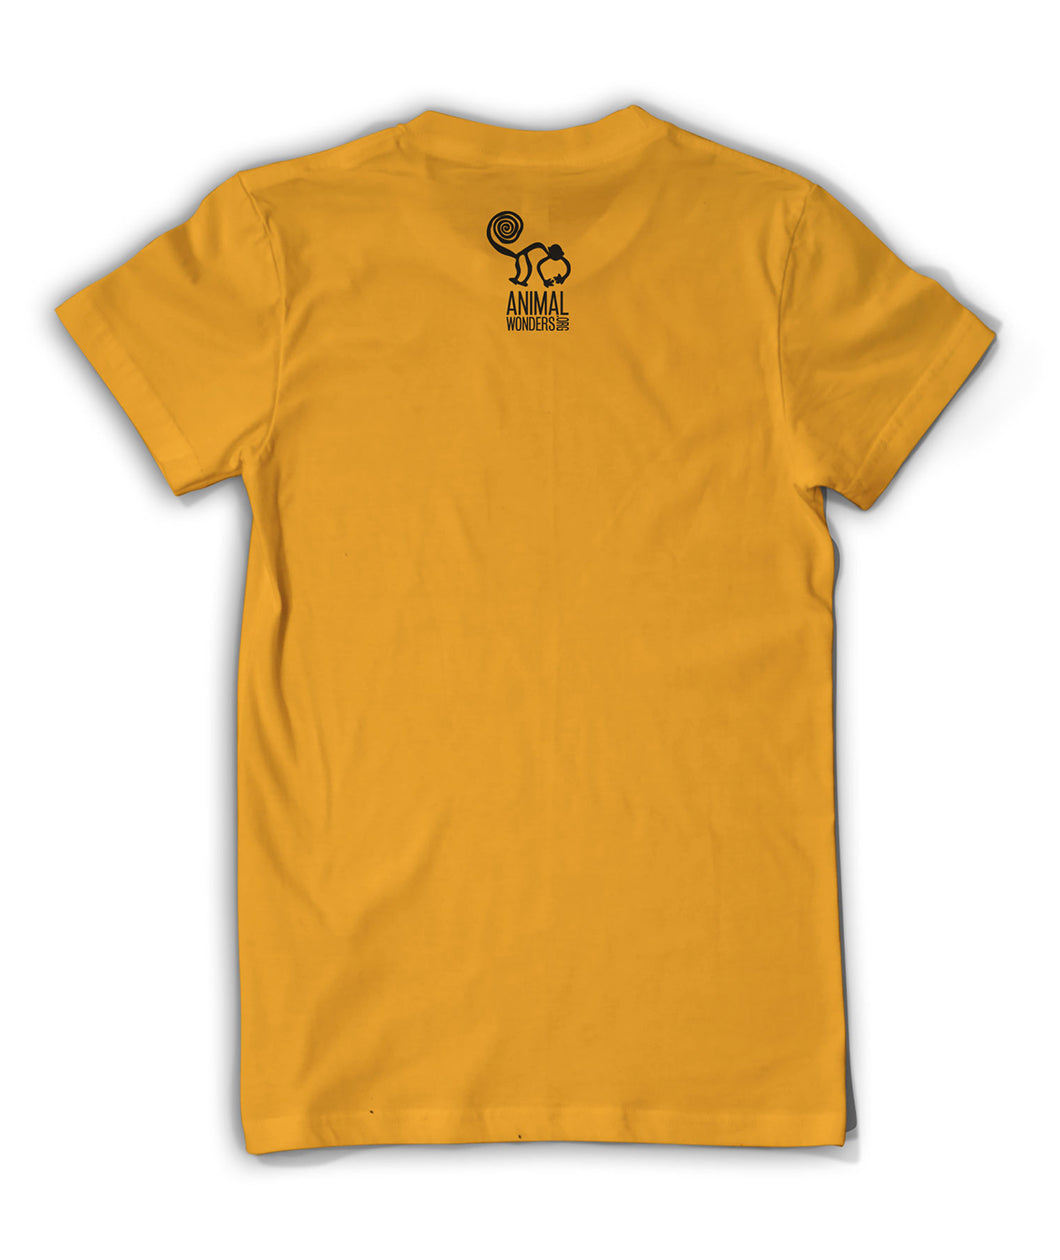 Back of yellow shirt with Animal Wonders logo below collar. Logo is of black cartoon silhouette drawing of monkey with spiral tail is above “Animal Wonders INC” with each word in black, all caps, sans serif font, and varying sizes. INC is on its side at end of the word Wonders, which are below Animal - from Animal Wonders